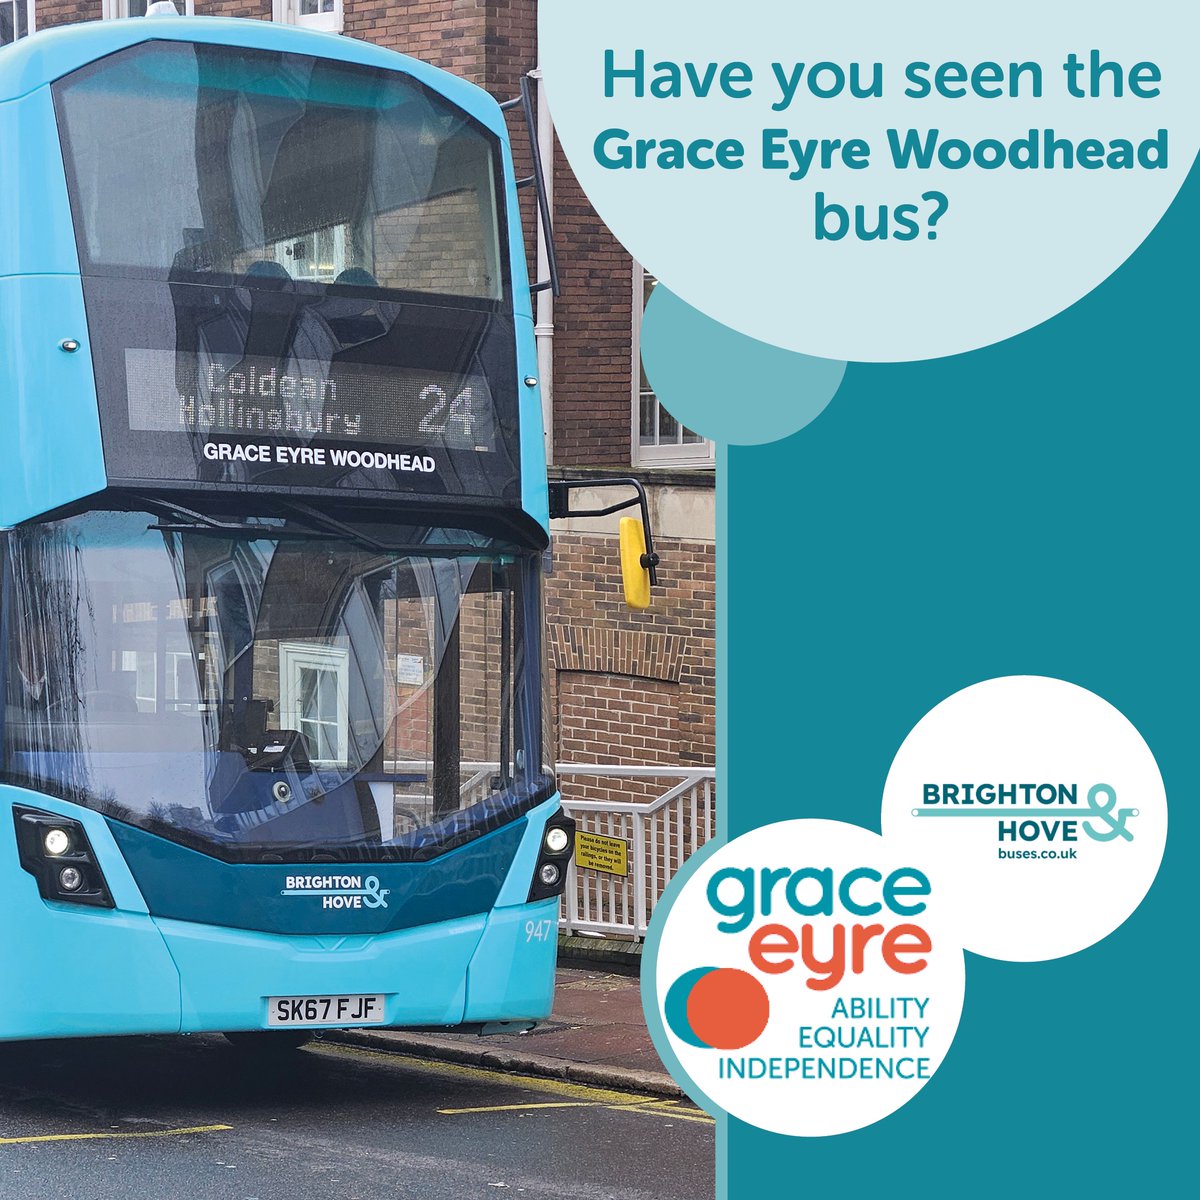 Our friends @BrightonHoveBus have honoured names from local history for 20+ years. 👍 We're excited to see our founder's name back on a bus w/lovely redesigned livery. 👏 Have you seen the Grace Eyre bus around town? 👀 #Brighton #BrightonHistory @BrightonWHG @BrightonMuseums